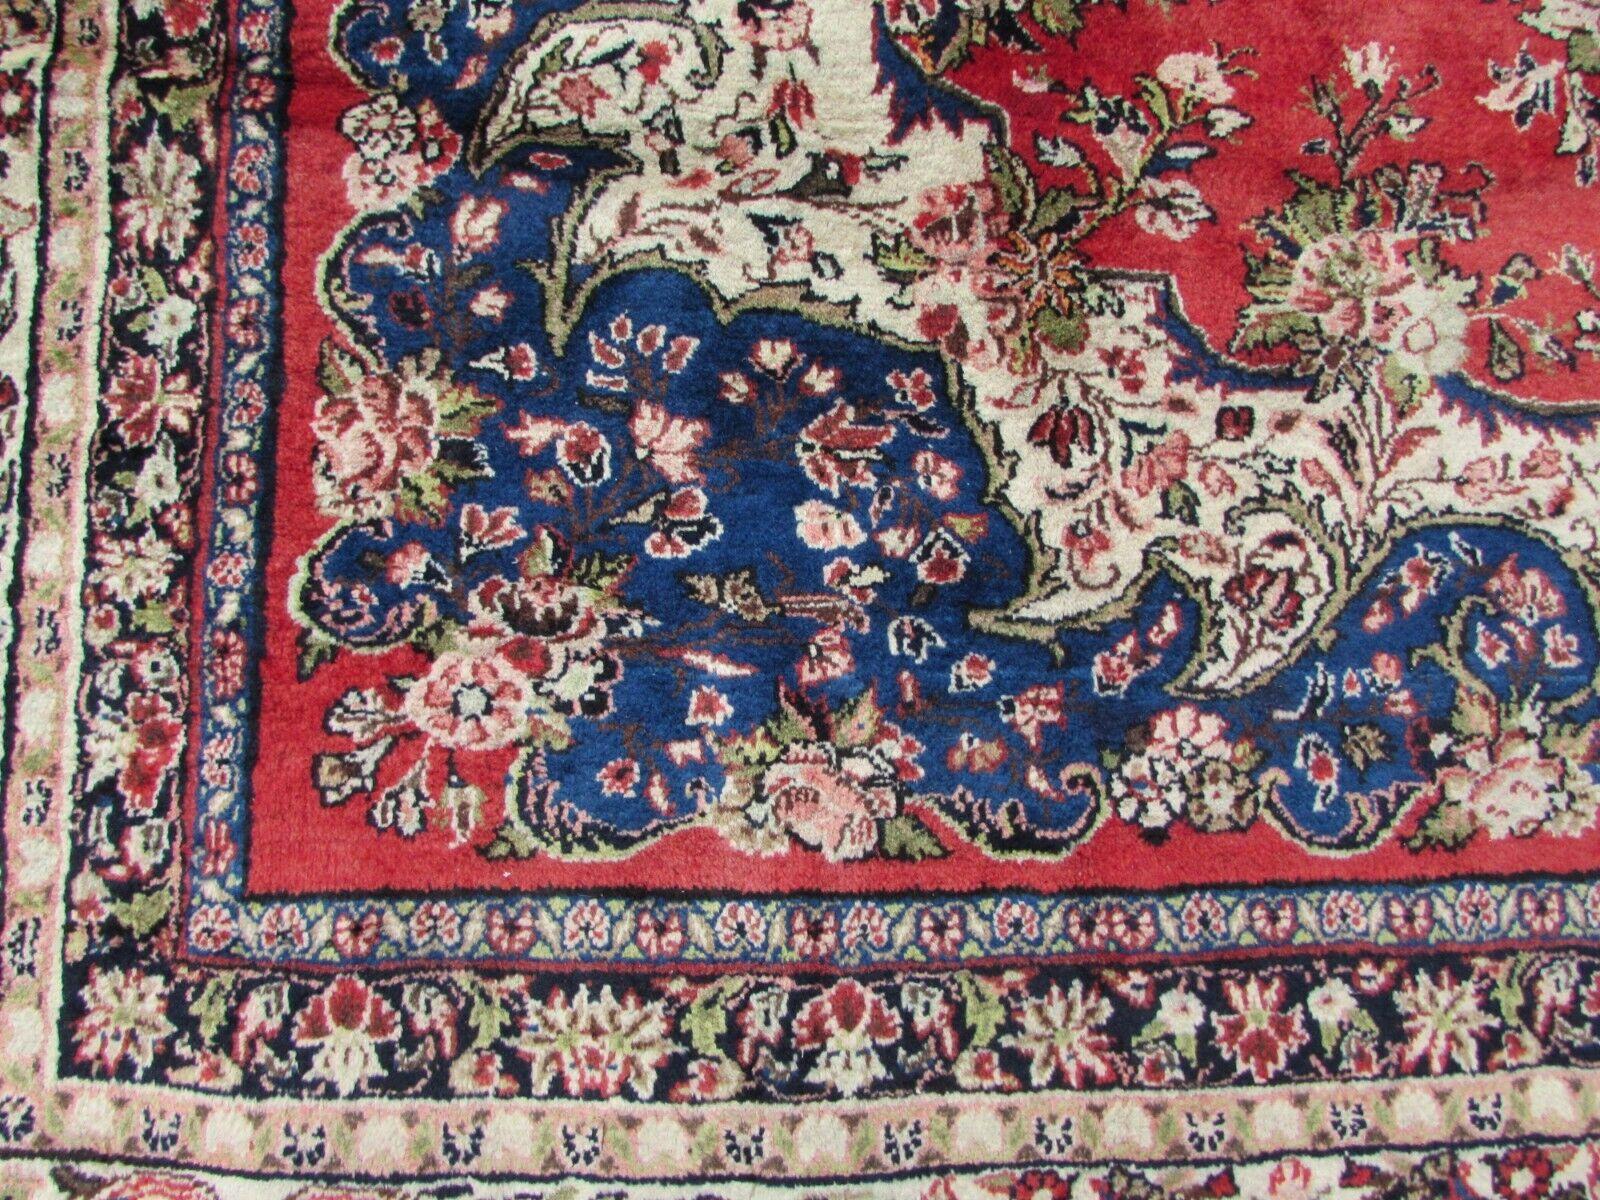 Late 20th Century Handmade Vintage Persian Style Sarouk Oversize Rug 10.7' x 16.4', 1970s - 1Q72 For Sale